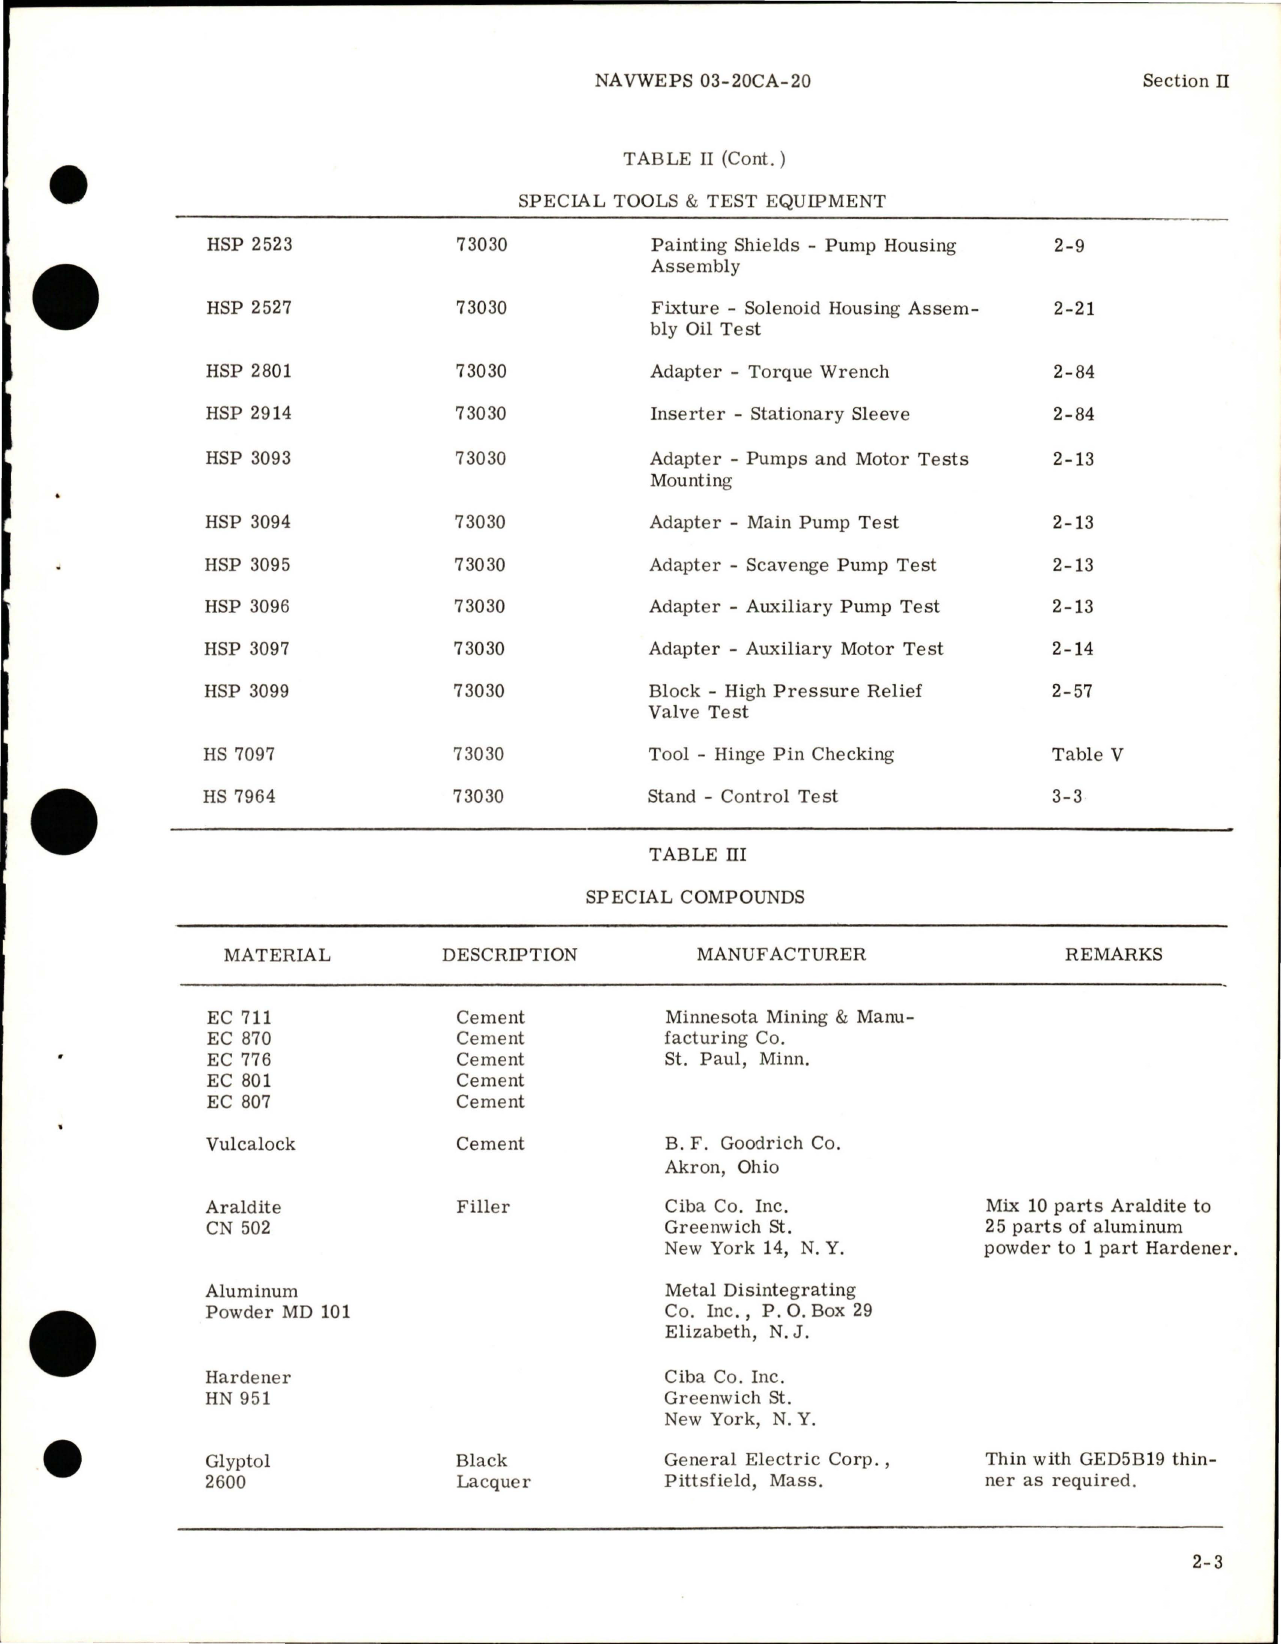 Sample page 7 from AirCorps Library document: Overhaul Instructions for Control & Brush Pad Assy, Drive Bracket Assy, and Auxiliary Oil Supply Assy